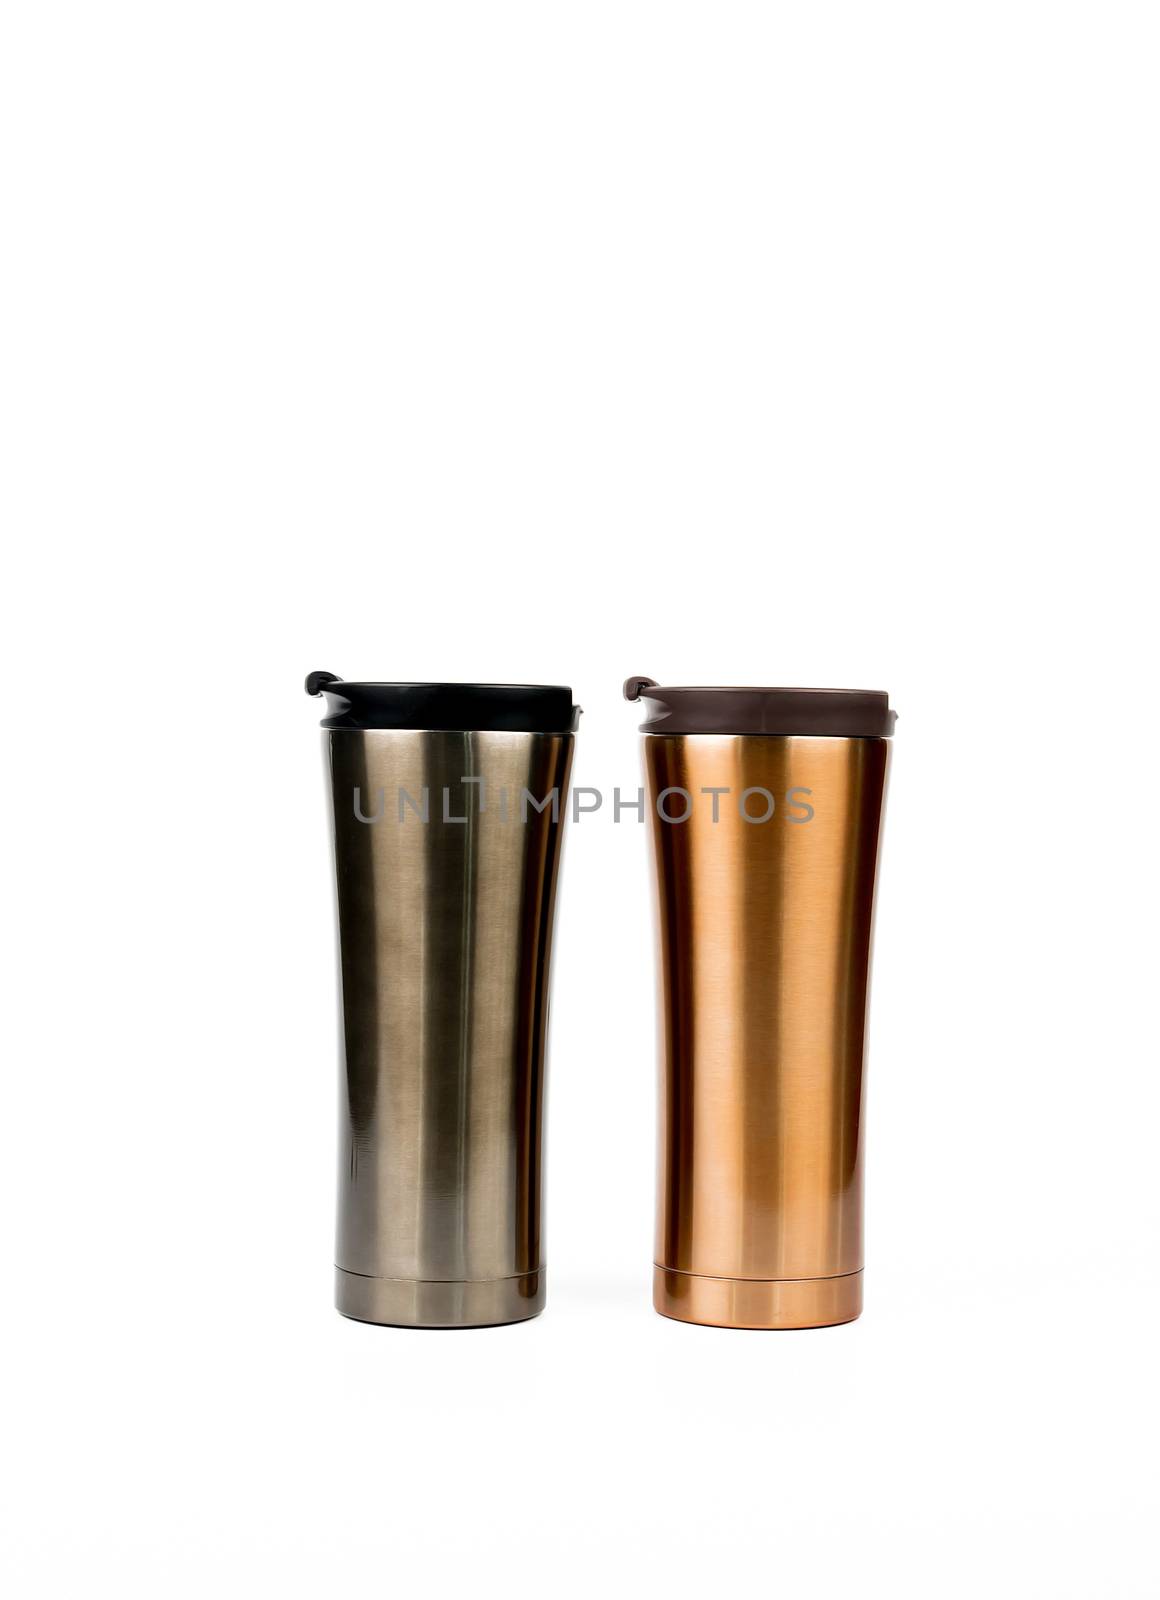 Silver and gold thermos bottle on white background with copy space